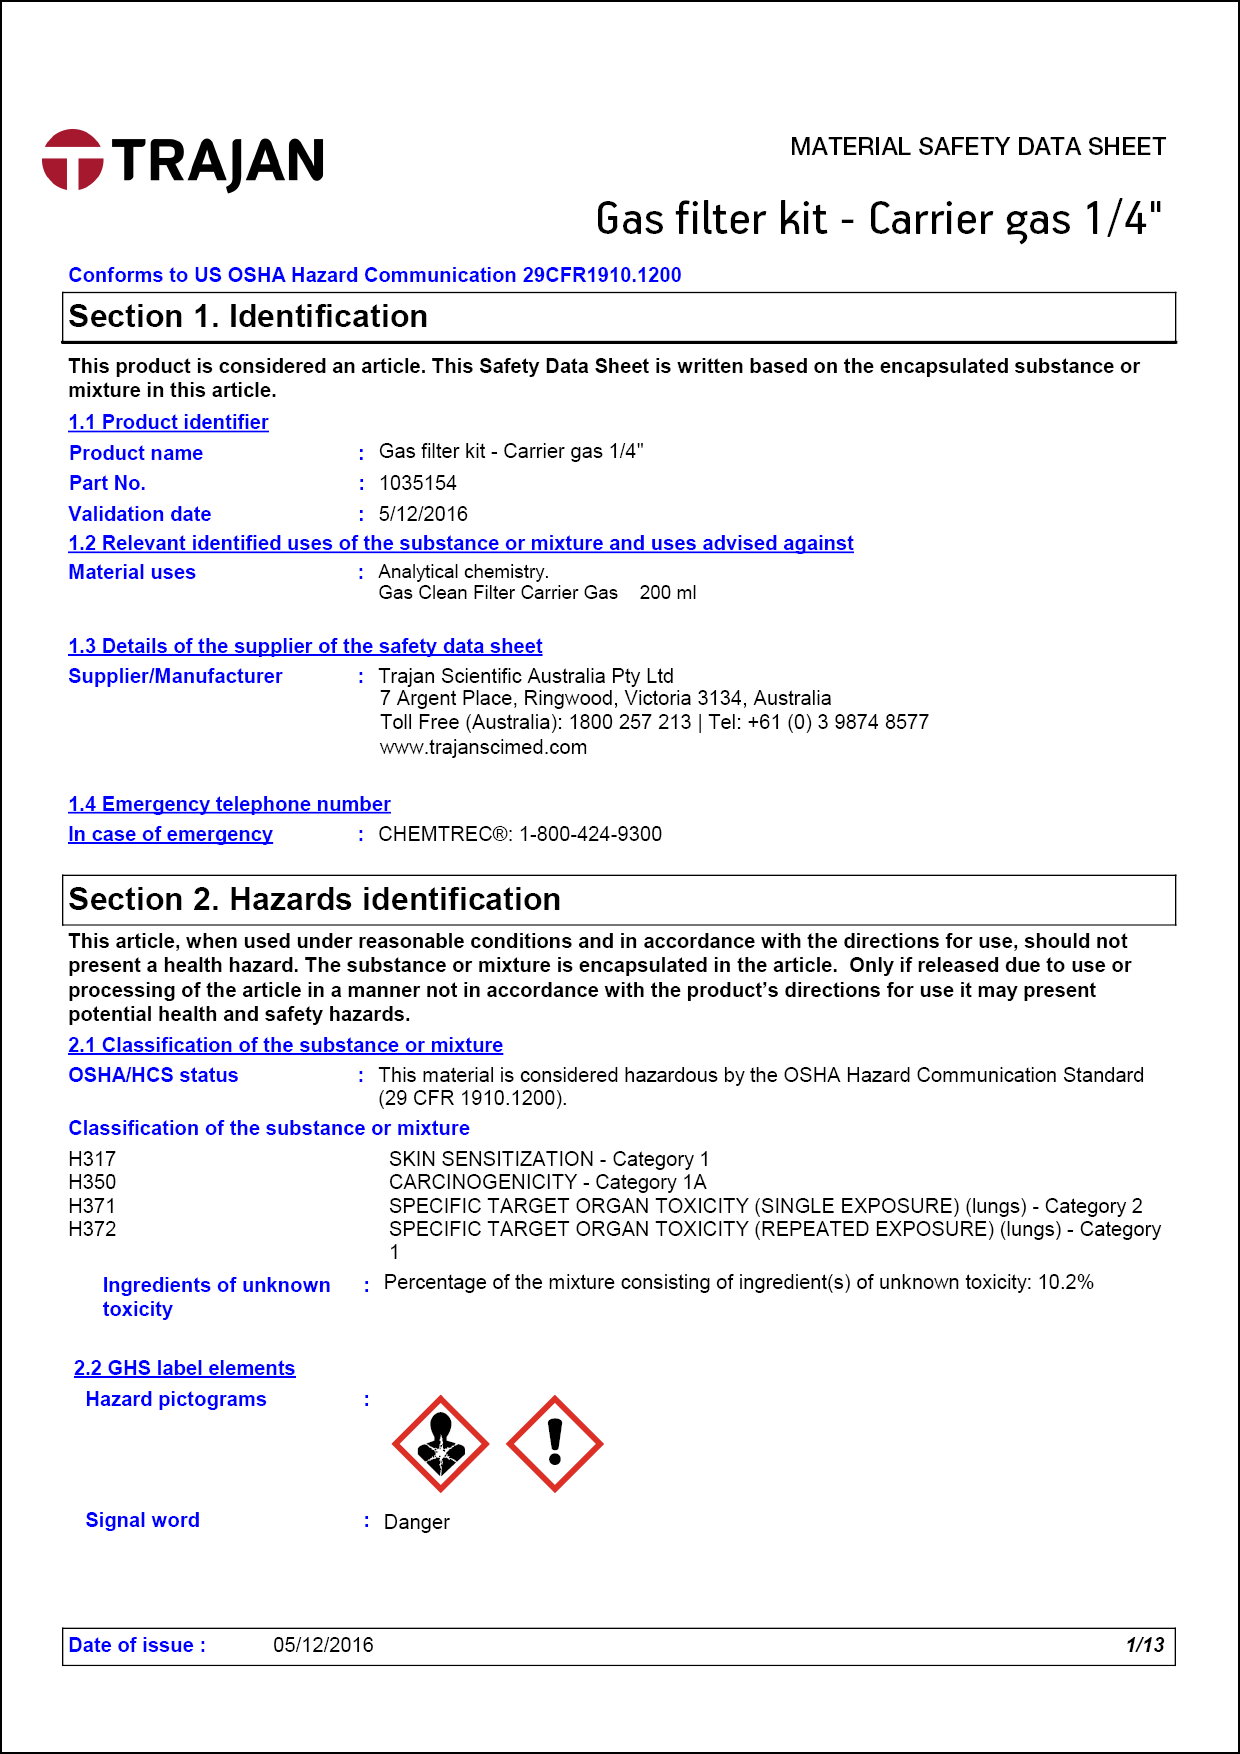 Material safety data sheet - Gas filter kits - Carrier gas 1/4"